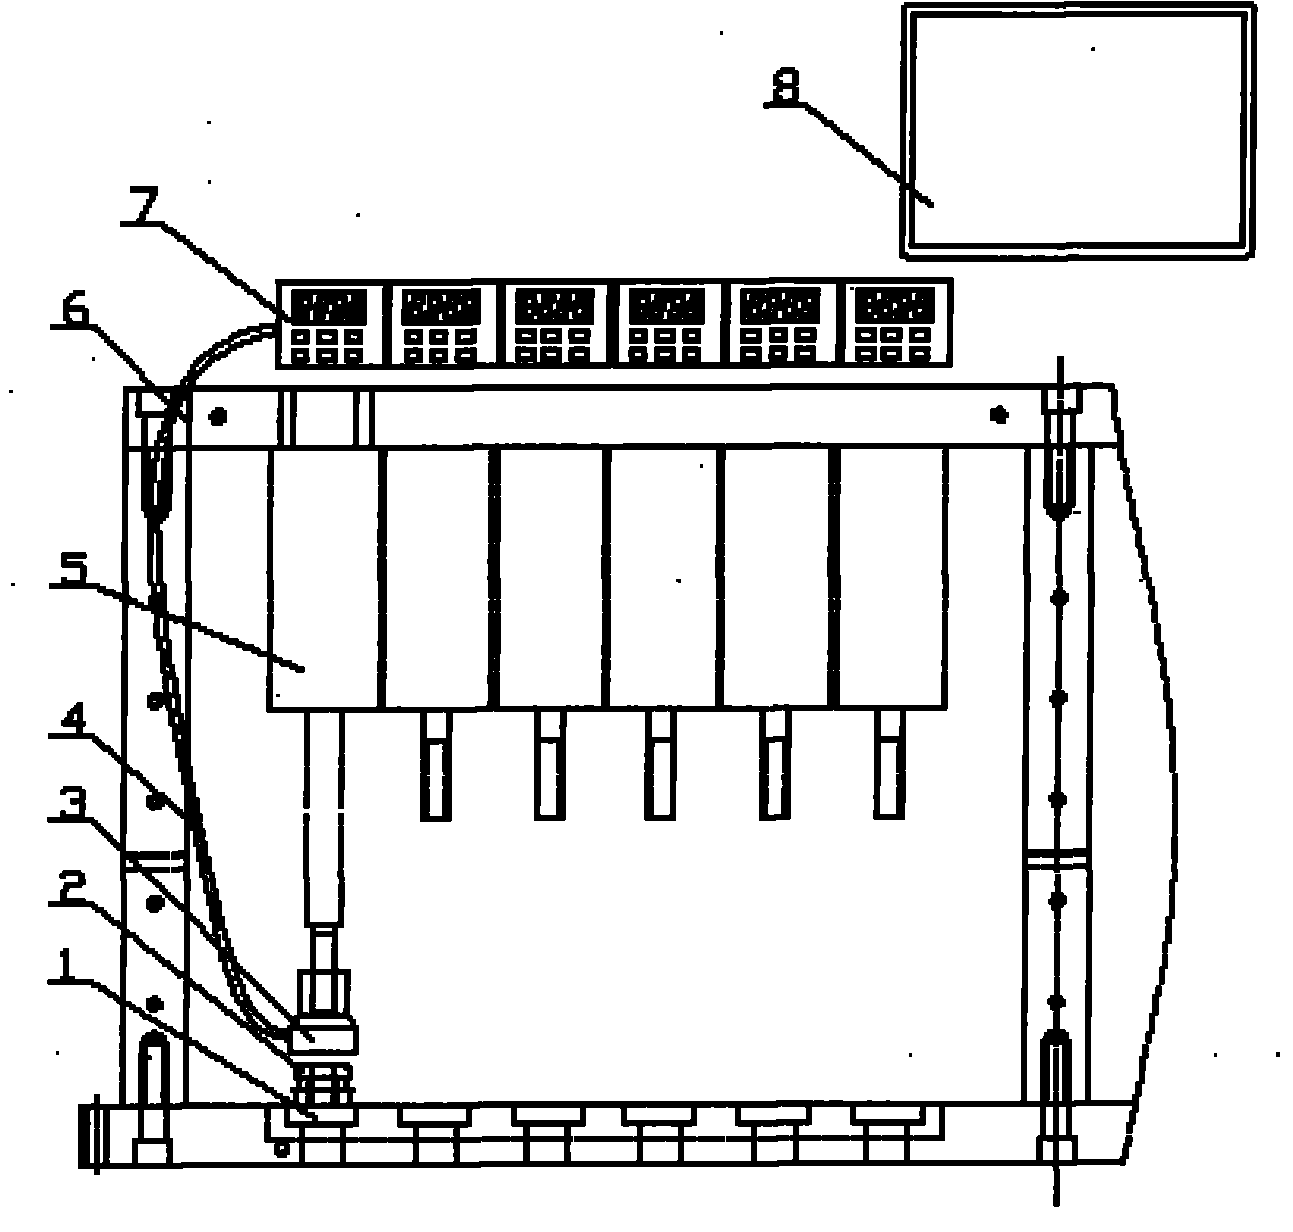 Method and device for detecting air tightness of 12 stations of automotive water seal